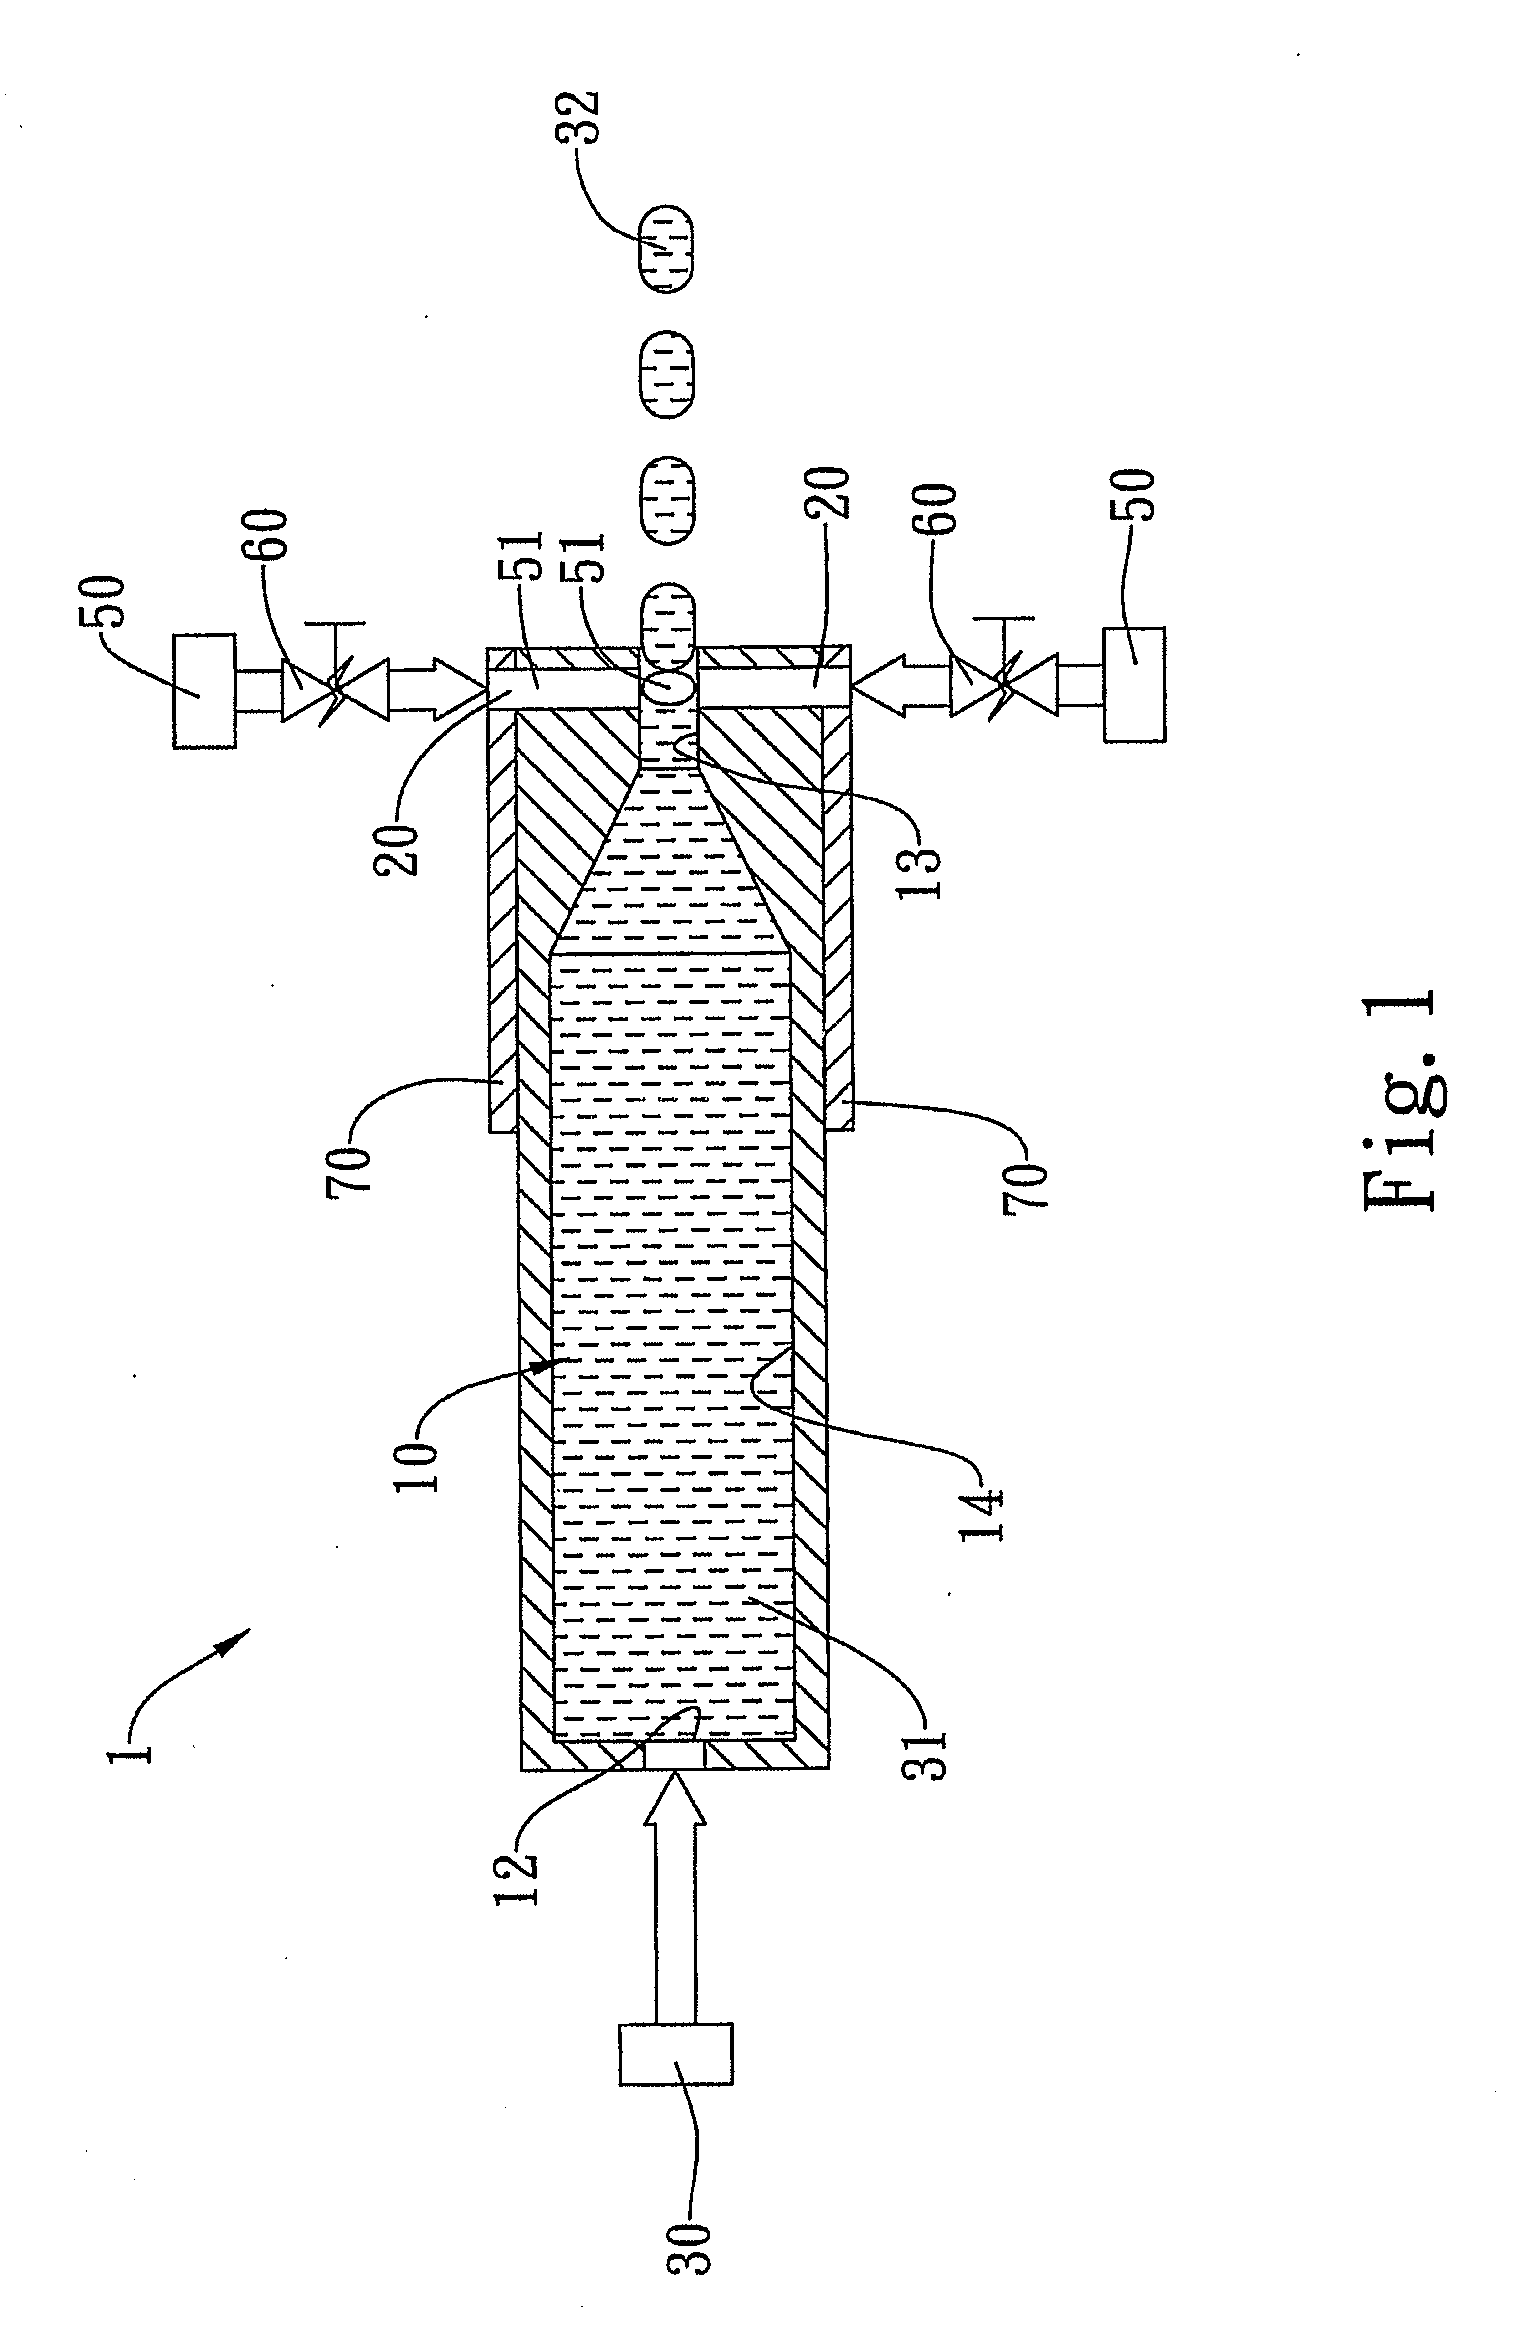 Droplet ejection device for a highly viscous liquid